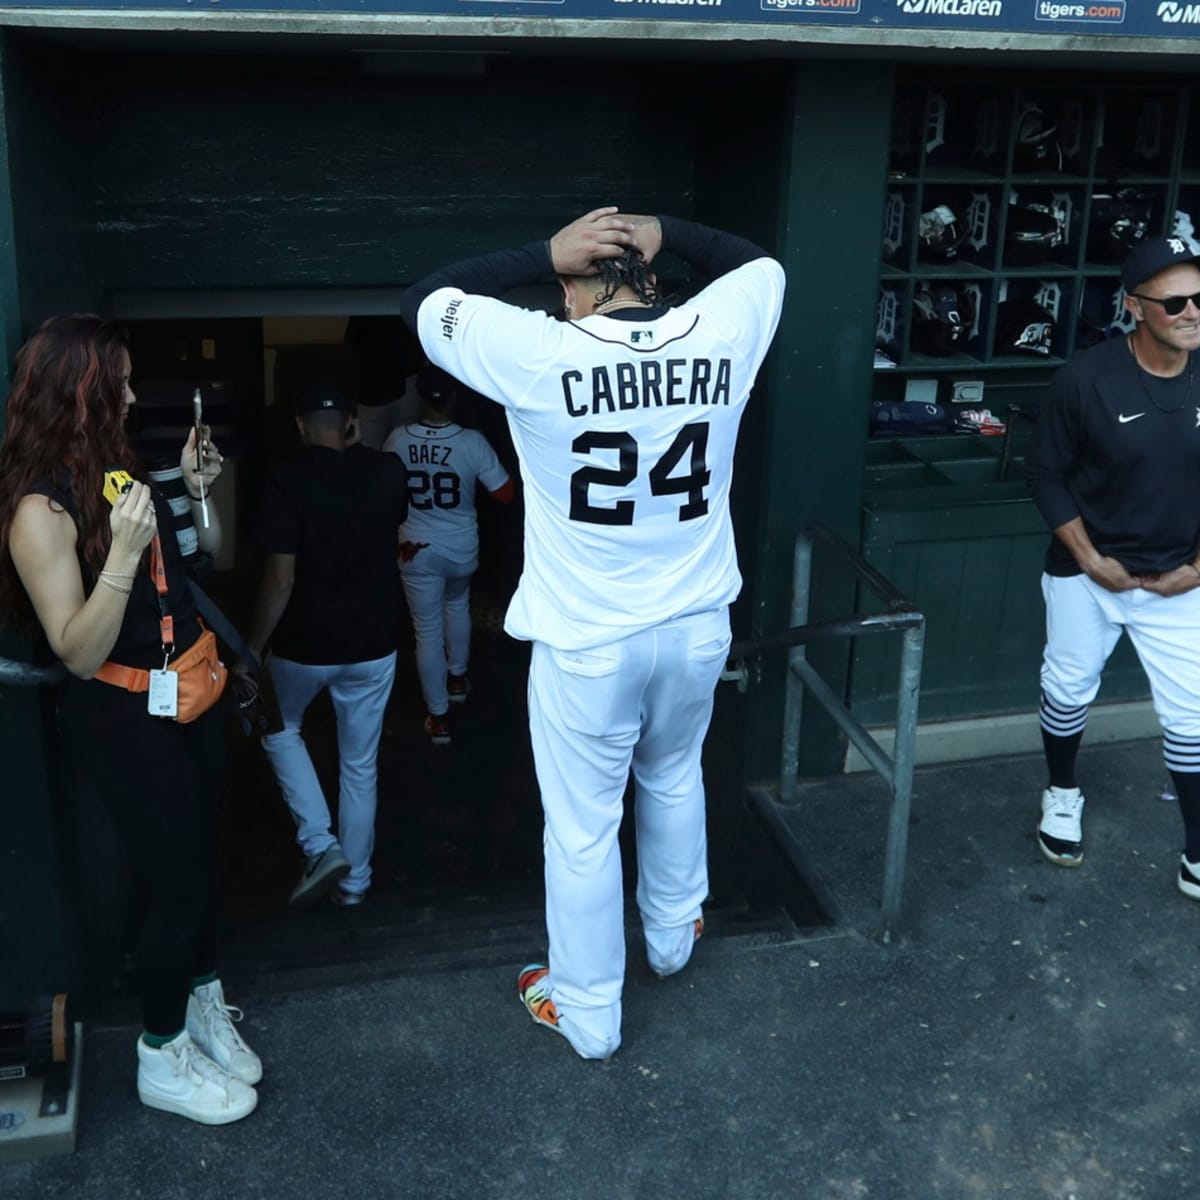 Surefire Hall of Famer Miguel Cabrera Got an Awesome Sendoff From Detroit  Tigers, Fans - Fastball